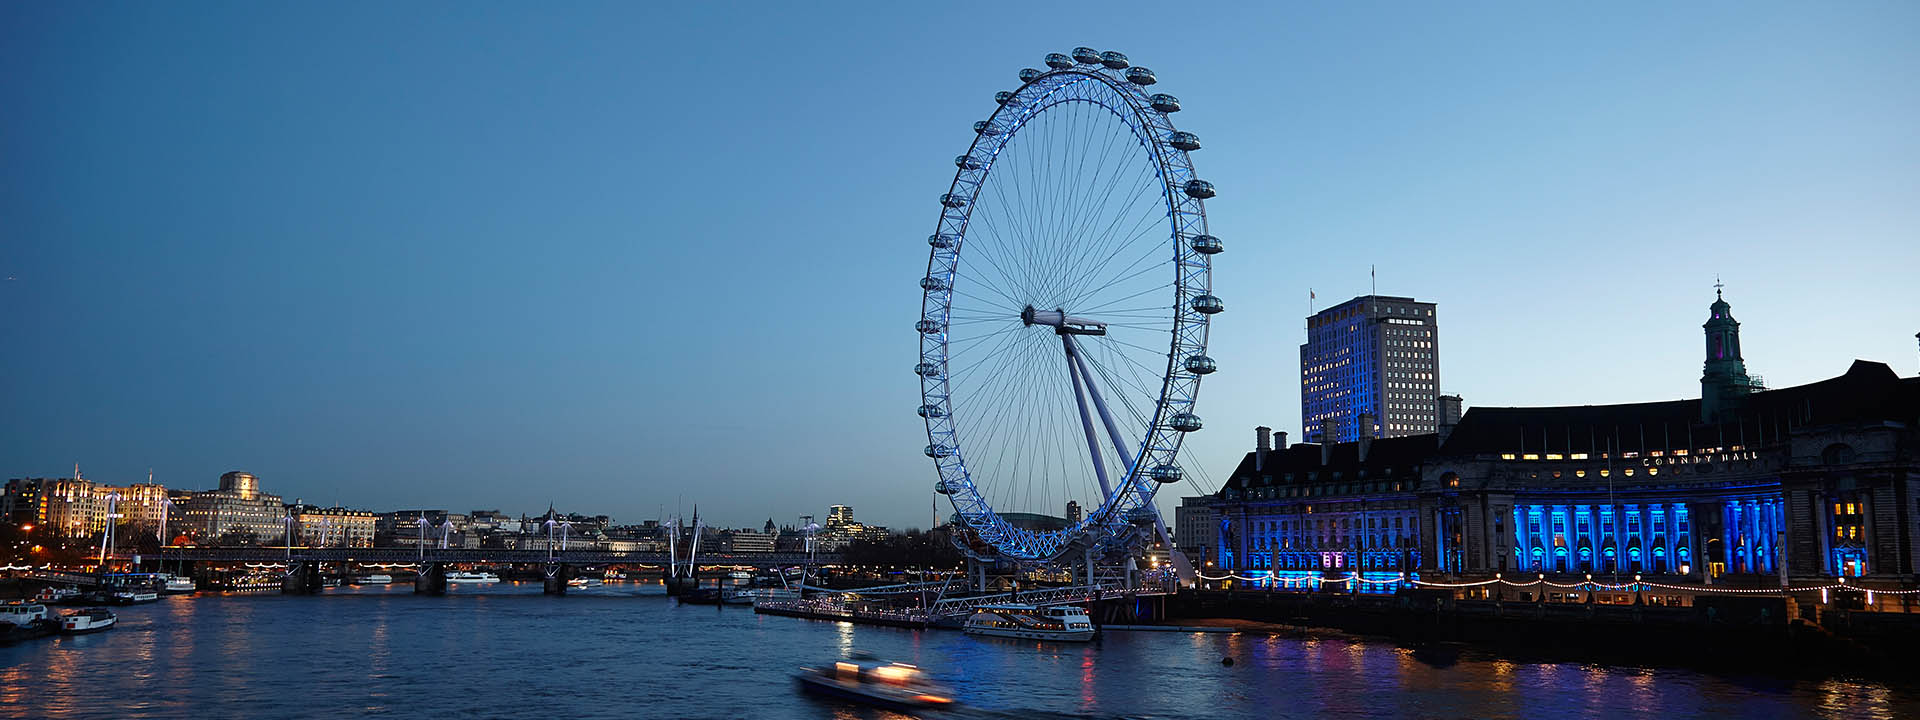 The Concierge at Claridge's Hotel highly recommends a view of the magnificent London Eye.